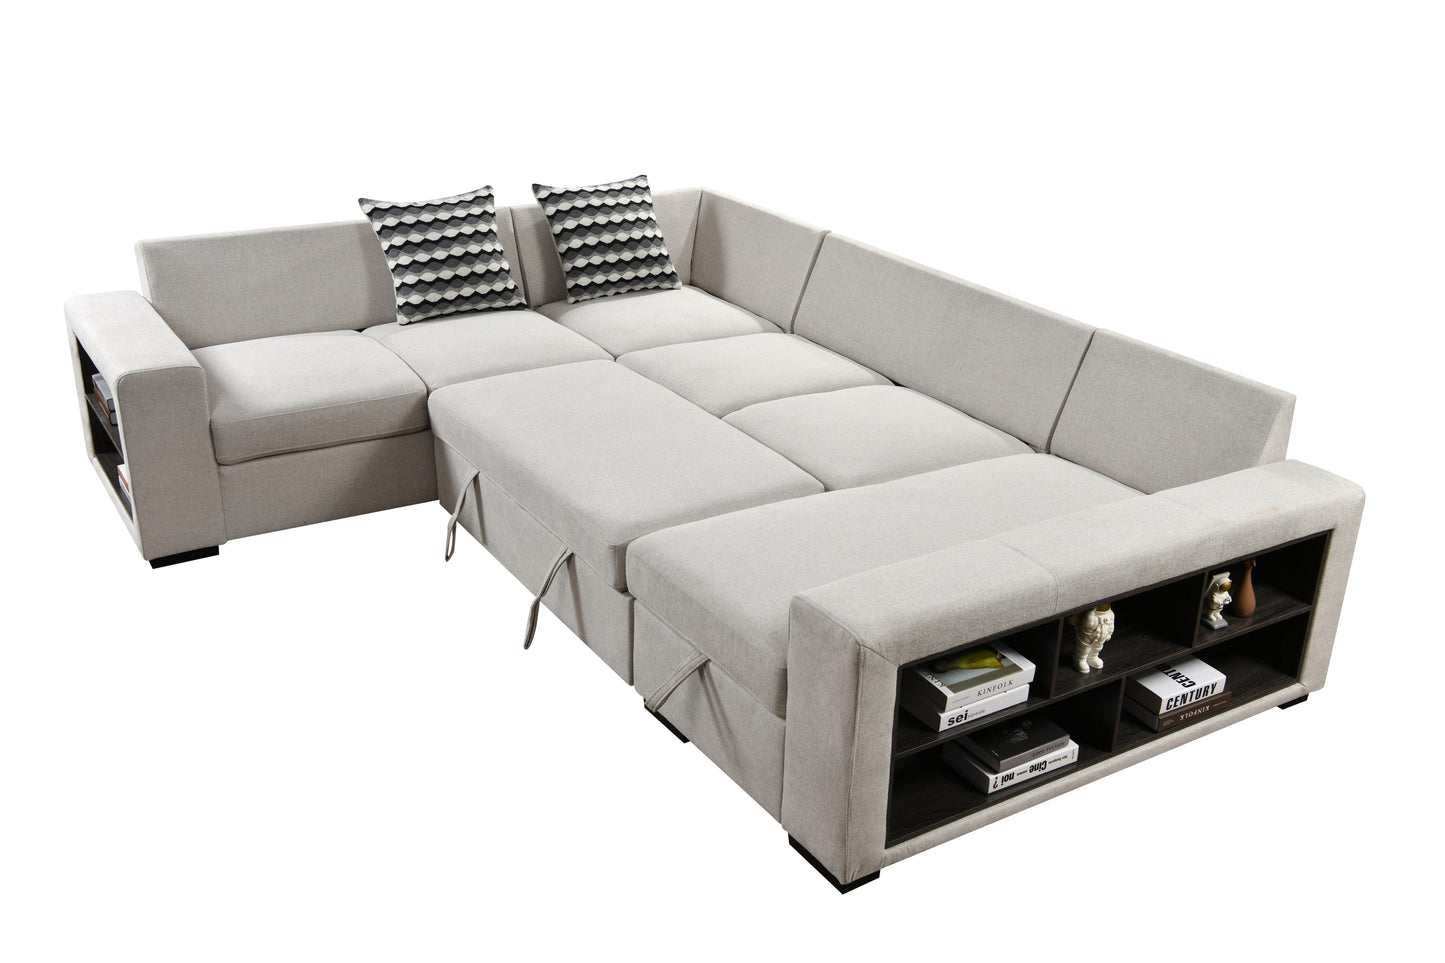 U-Shaped 7-Seat Sectional sleeper, Cabinet, Storage Chaise